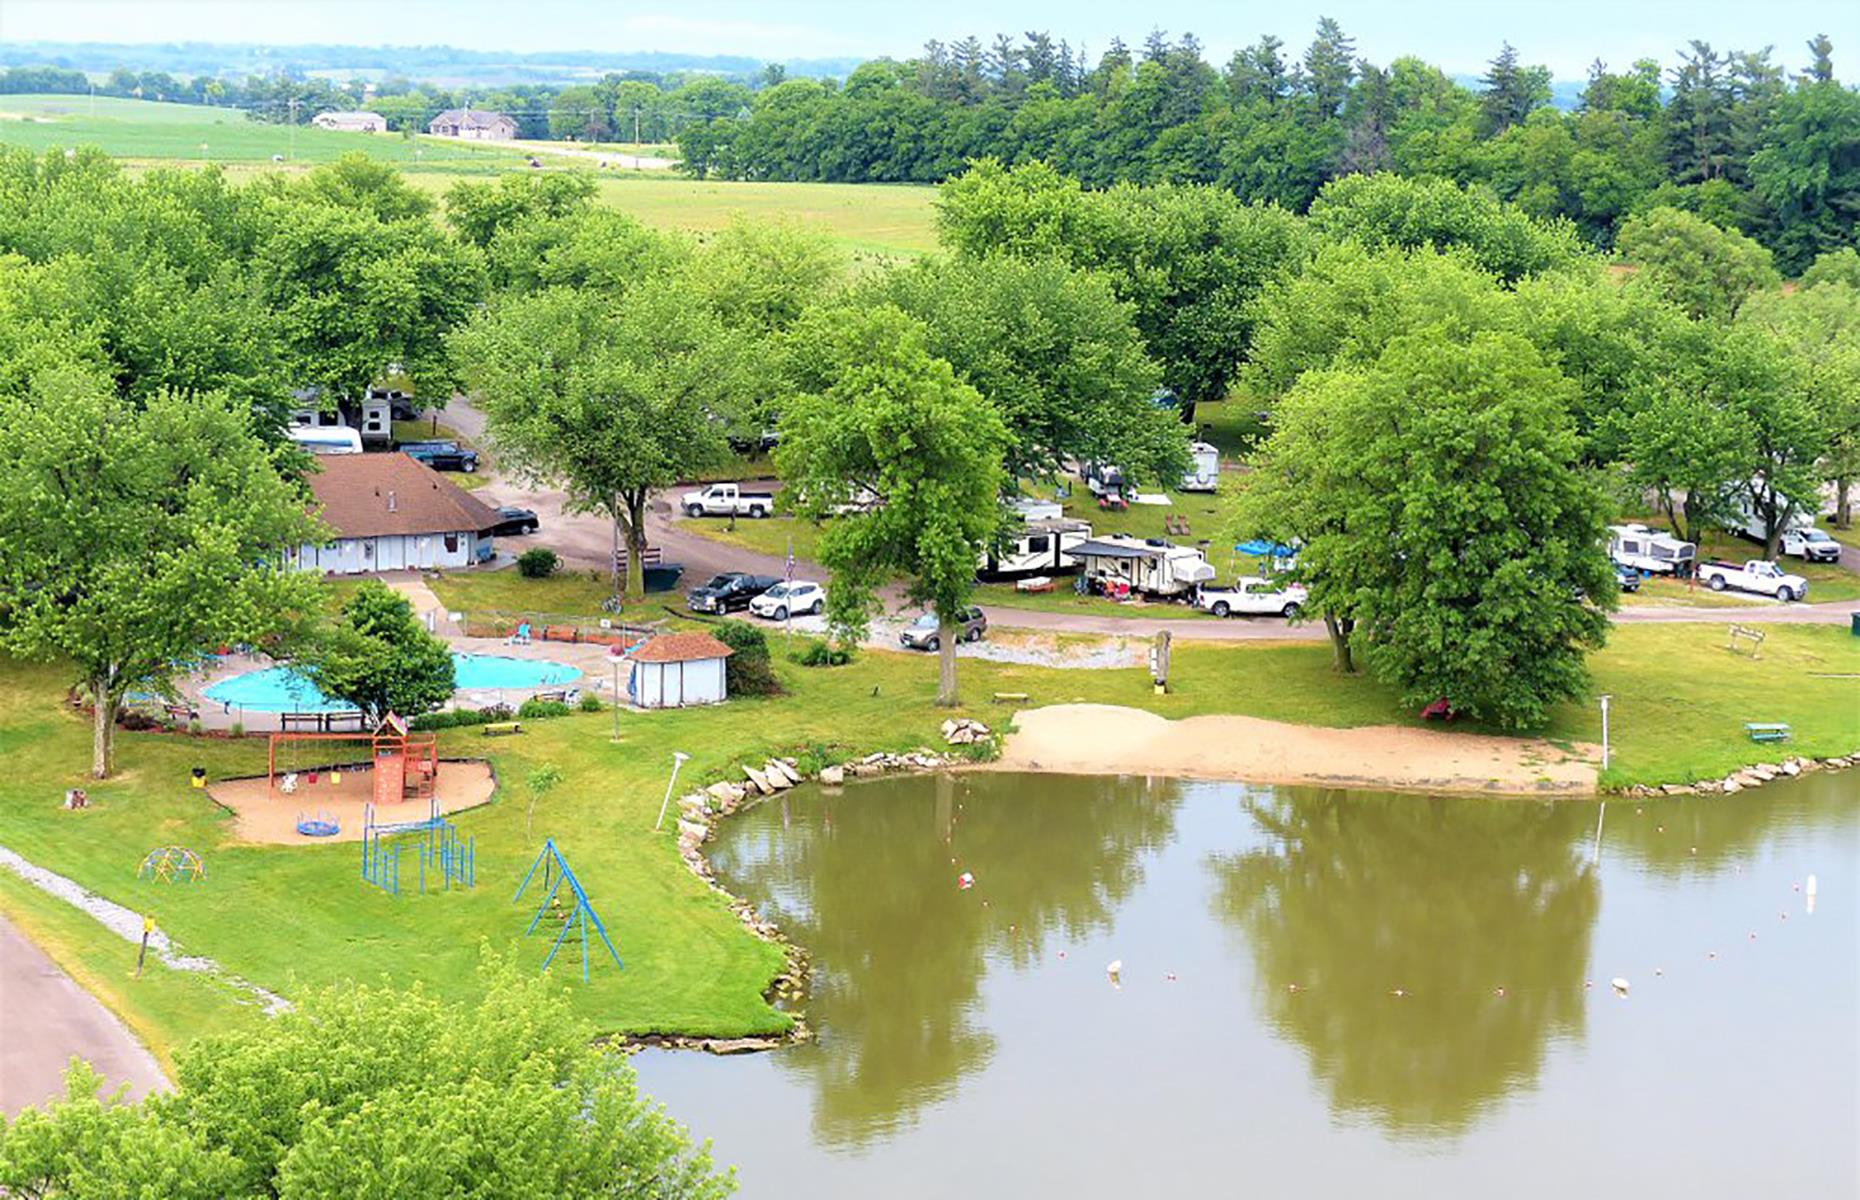 <p><a href="https://www.sleepyhollowia.com/">This family-orientated park</a> in Oxford centers around a large fishing lake, and there's a pool, beach area, and volleyball and basketball courts to boot. For a true dose of the countryside, hayrack rides are usually available too, but check for current availability. Other on-site amenities include Wi-Fi, a camp store and full hook-up sites, and the seven villages that make up the Amana Colonies are also nearby. <a href="https://www.facebook.com/sleepyhollowrvparkcampgound/">The Sleepy Hollow Facebook page</a> is the best place for current updates.</p>